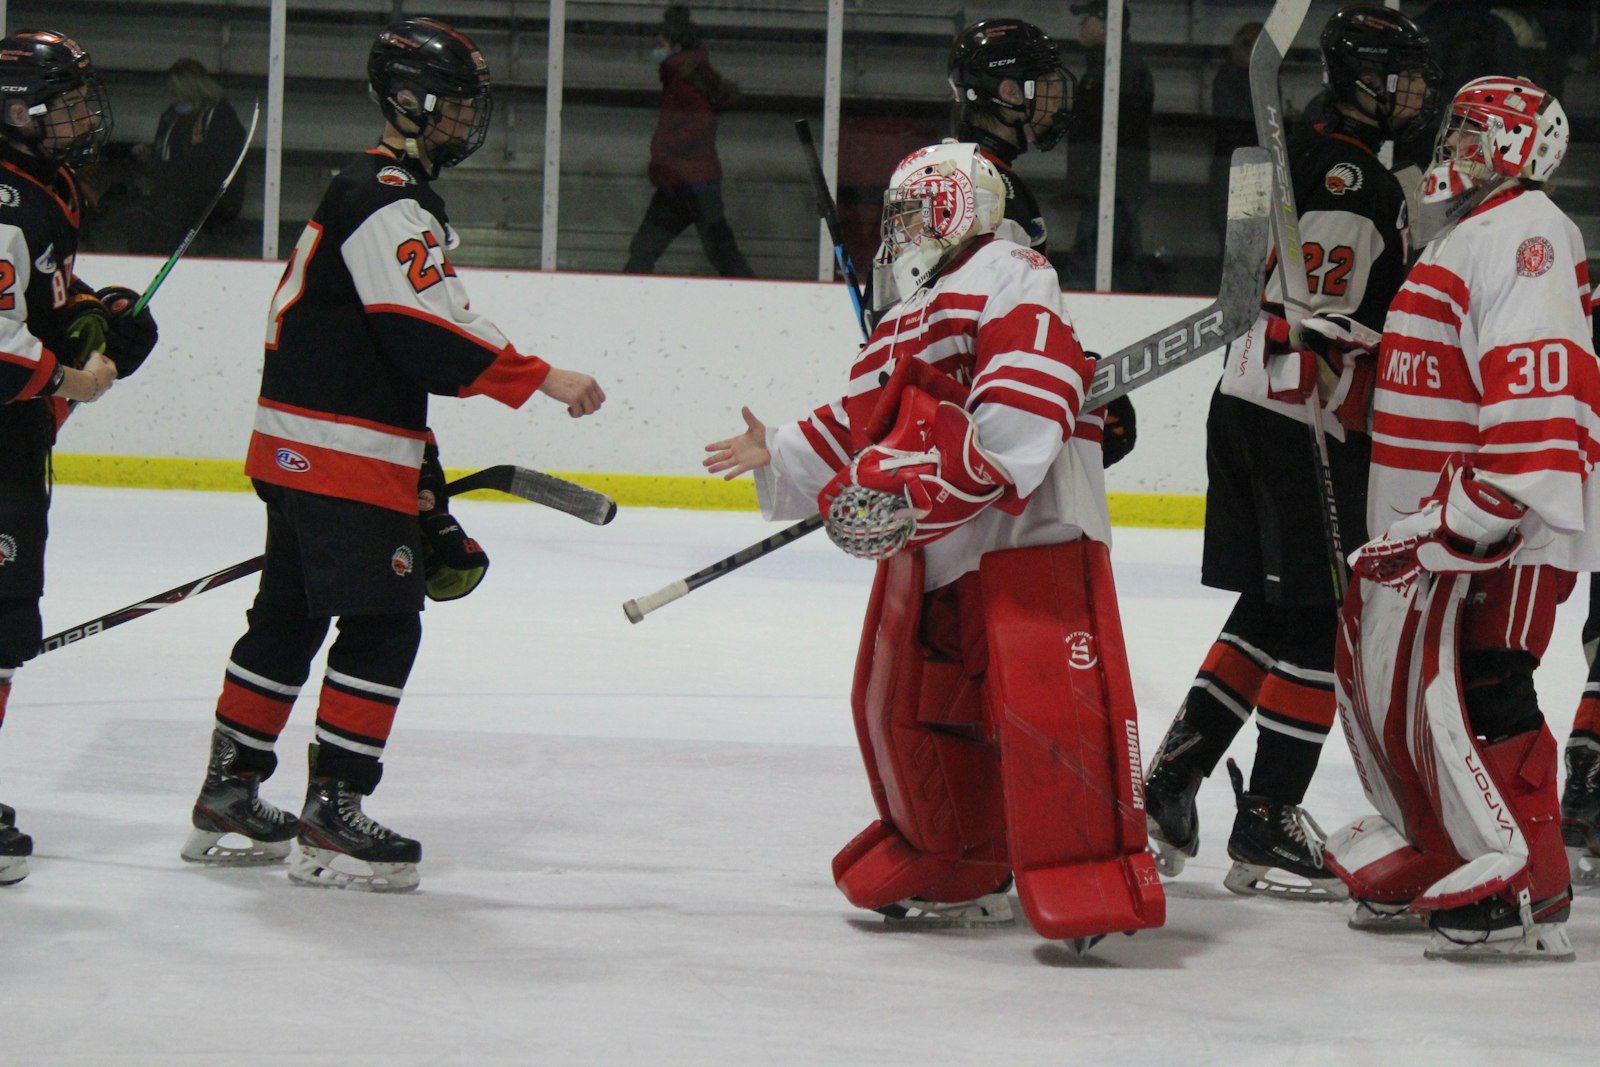 Orchard Lake St. Mary’s goalkeeper Kely Kane turned back all the Brother Rice shots he faced Jan. 11, as the Eaglets shut out the Warriors for the first time in 12 seasons.